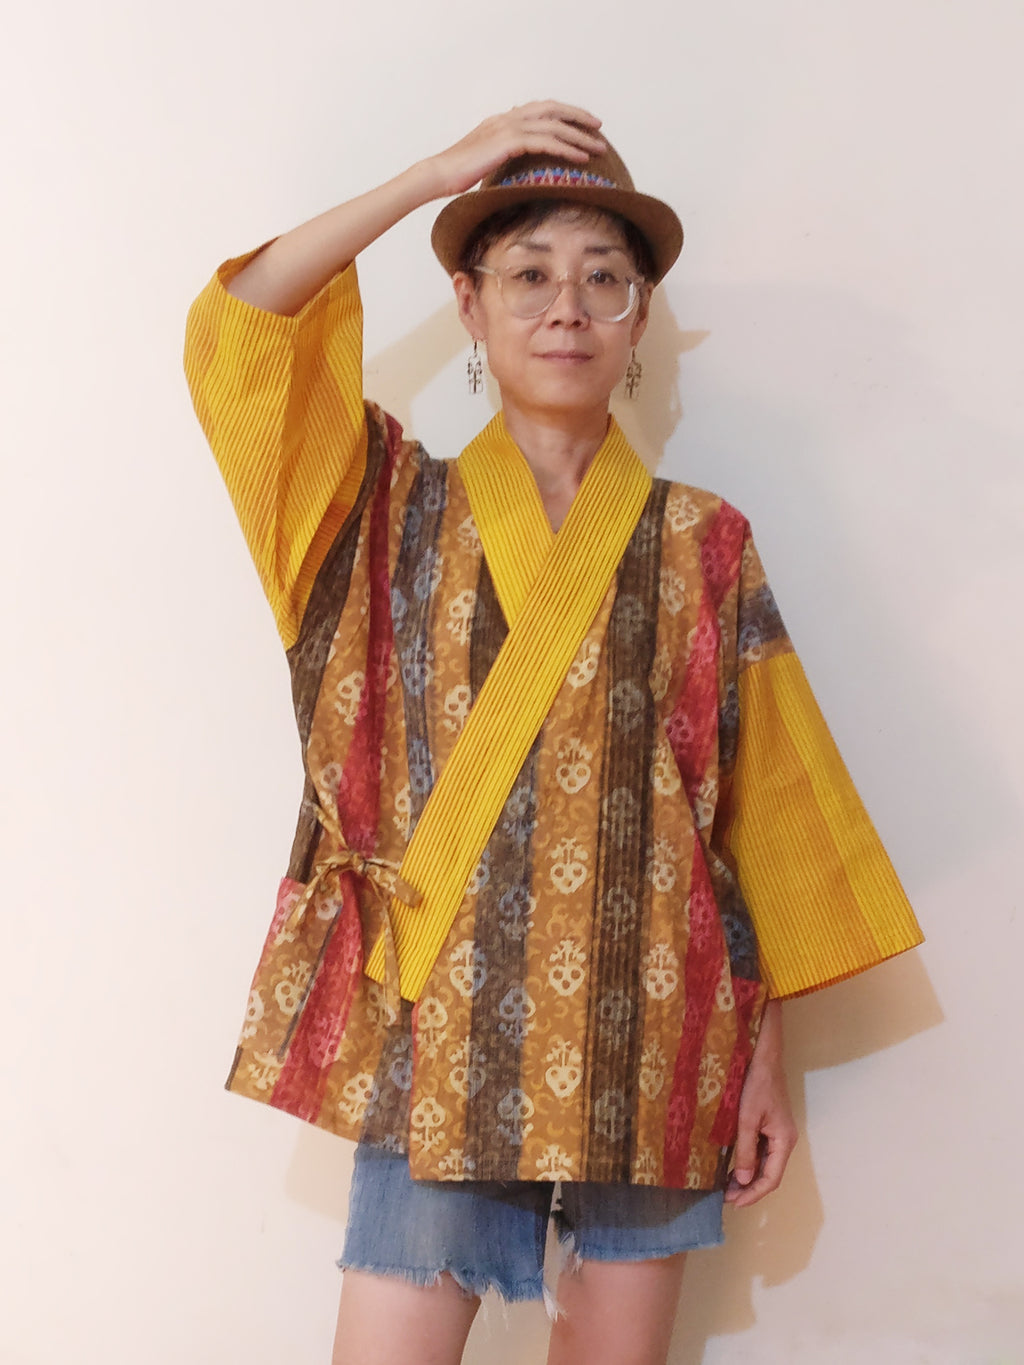 Kimono (Jinbei) short jacket from Japan with Indian cotton! Very comfy, very cool, chic and unique. Brush stripe (beige) cute print plus handloom cotton for the collar and the sleeves. Shop online!